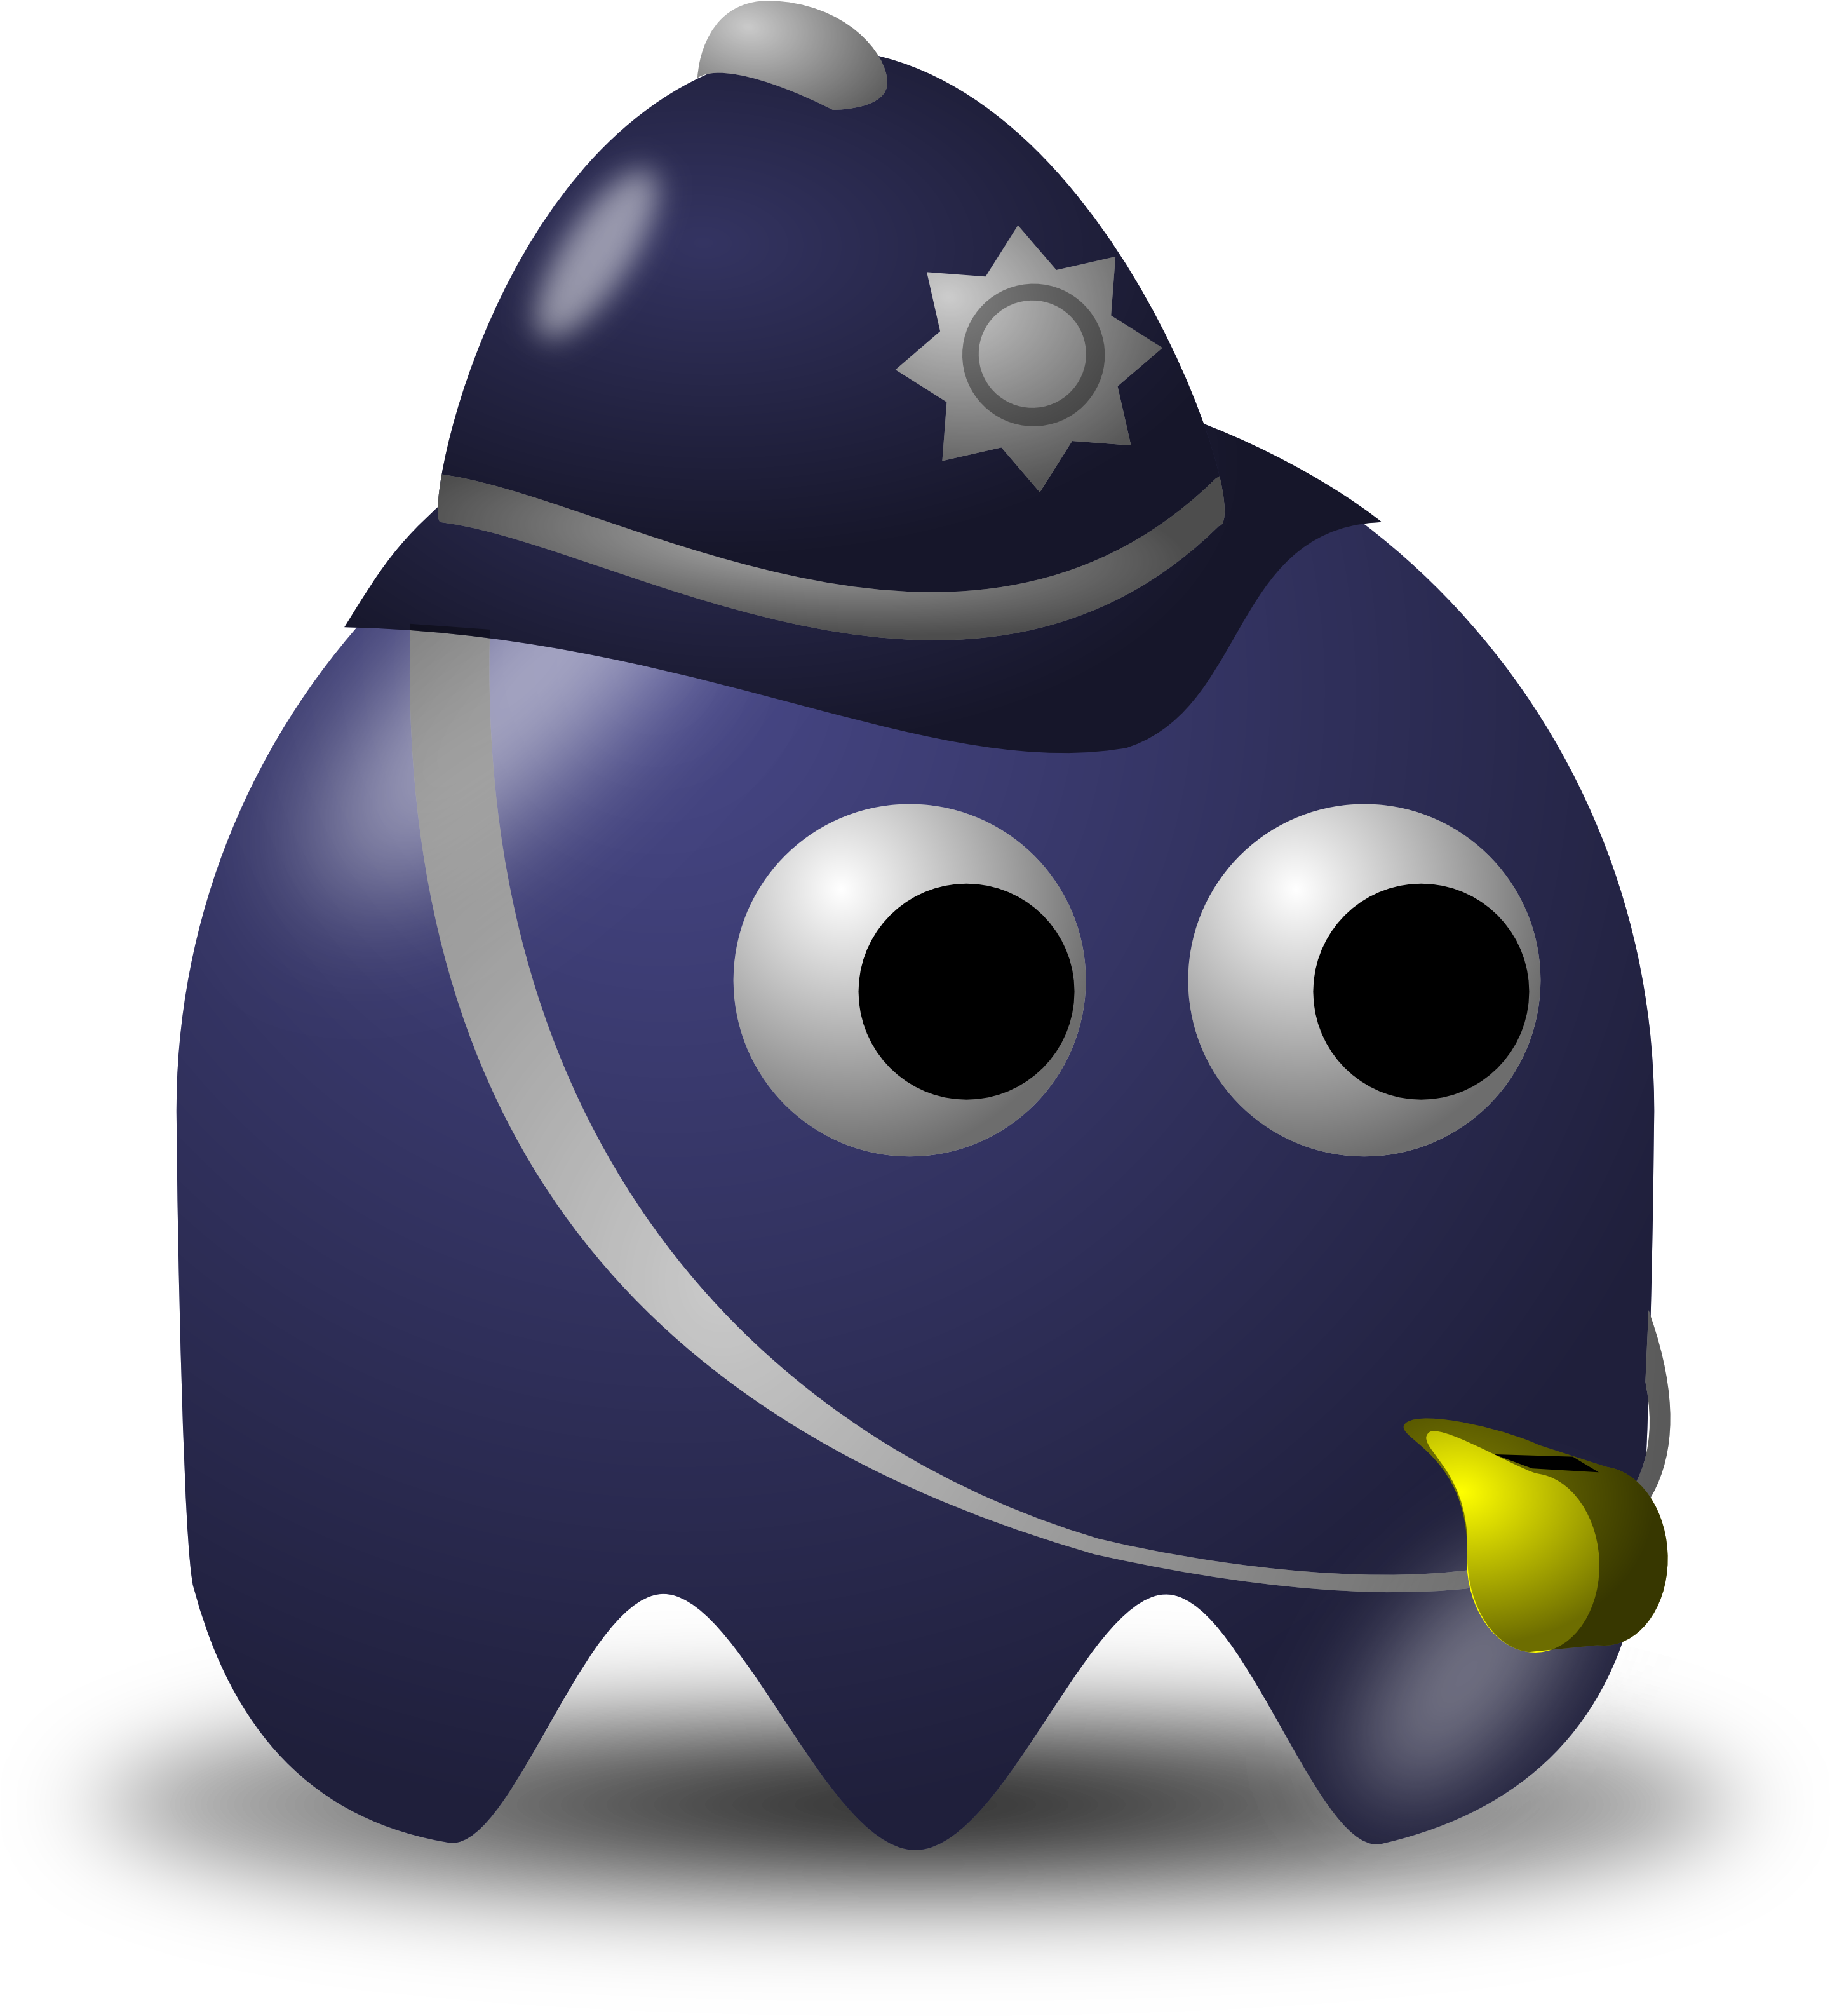 Policeman Avatar Character With A Whistle - Policeman Clipart (2938x3200)